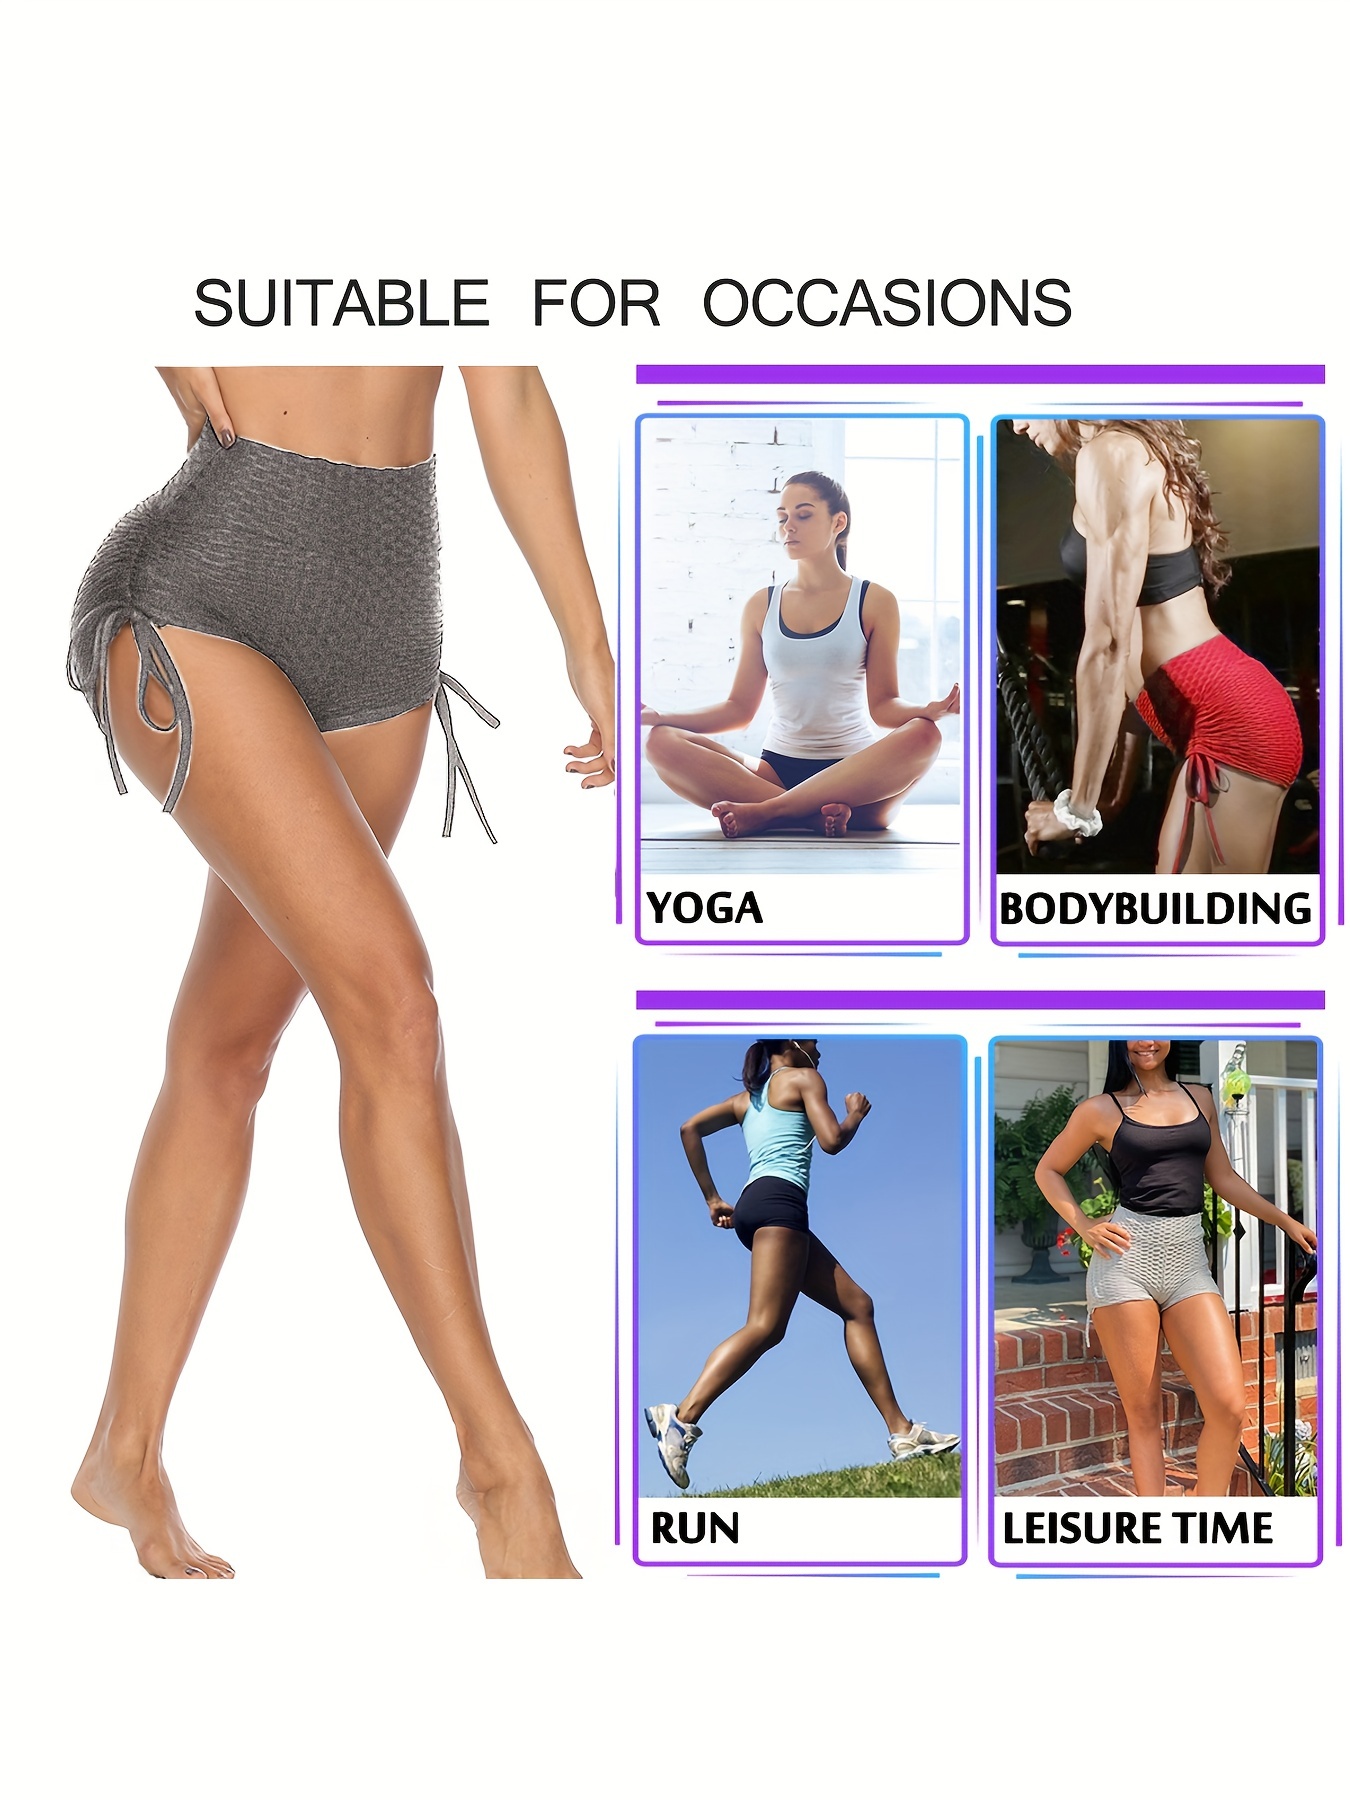 Womens Lace Up Drawstring Peach Yoga Shorts Women For Hip Lifting, Fitness,  Running, And Yoga From Yuanmu23, $44.05